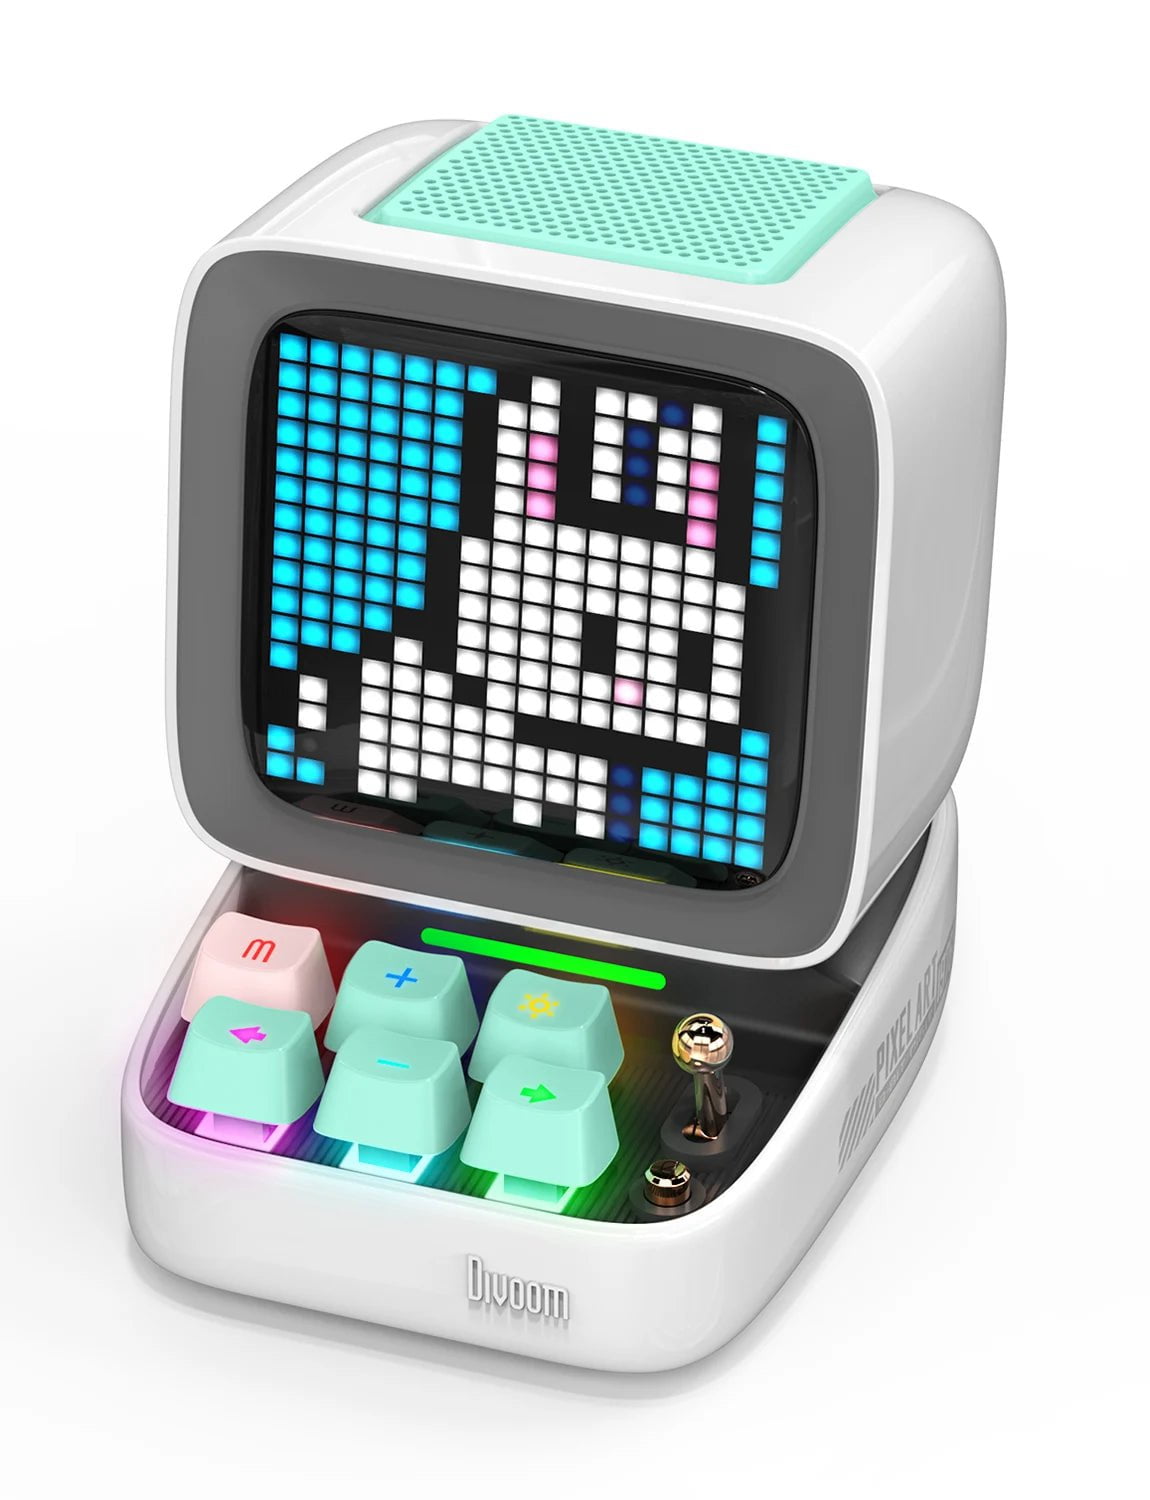 Divoom Ditoo Pixel Art Bluetooth Speaker - Wireless, 15W Output Power, Ideal for Gaming Room Setup with 16x16 LED App-Controlled Front Screen White